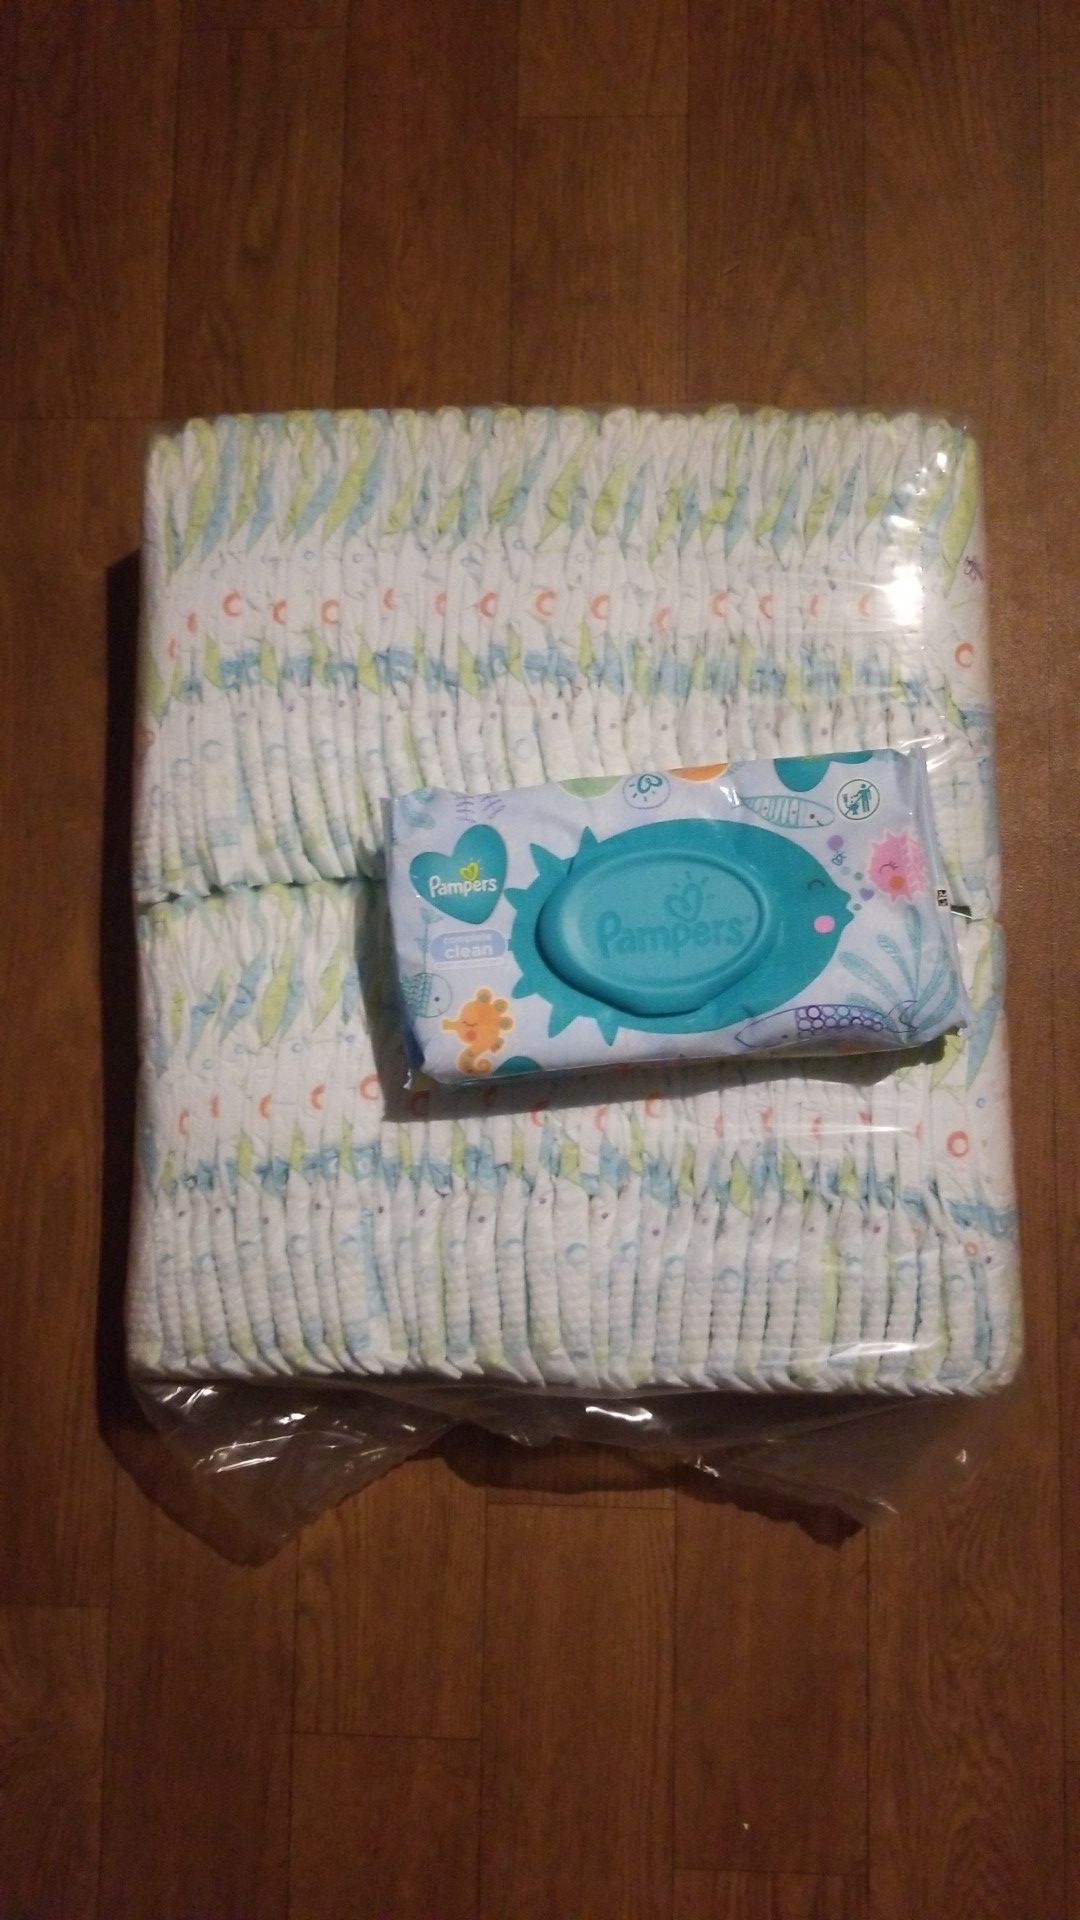 Size 3 Kirkland diapers w/ 1 pack of Pampers wipes